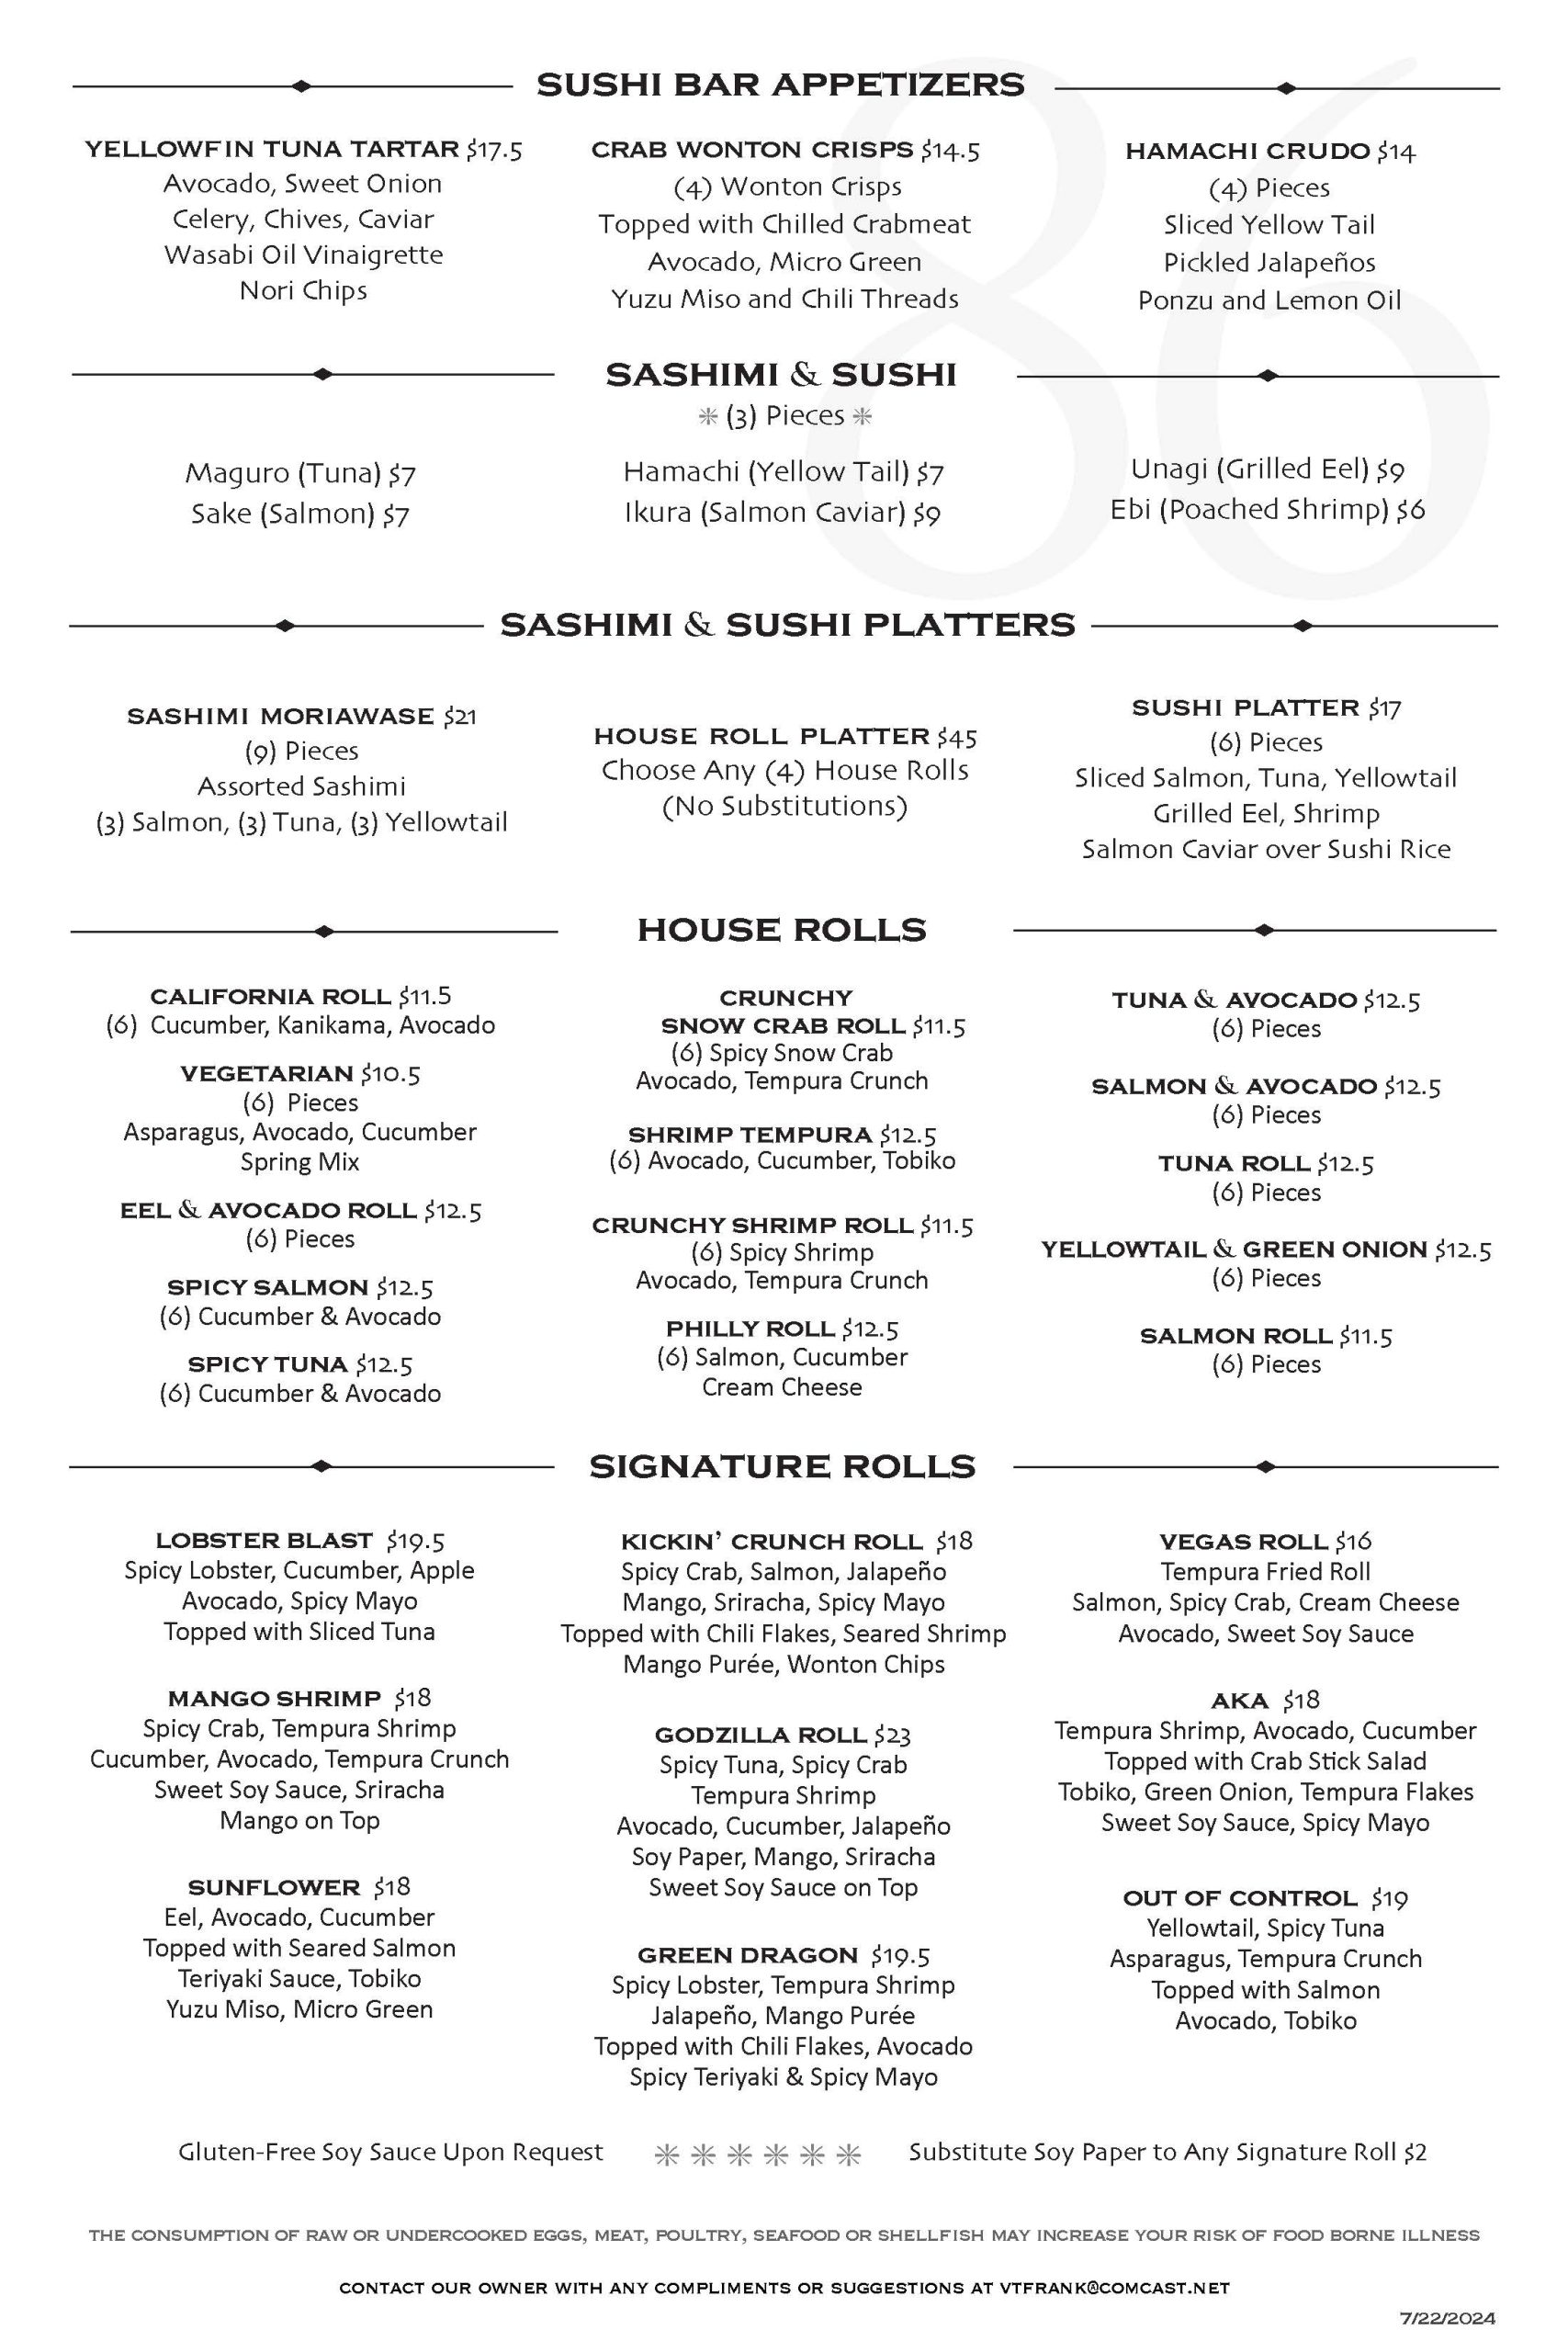 A black-and-white menu listing various sushi bar appetizers, sashimi, sushi platters, and house rolls with their respective prices.